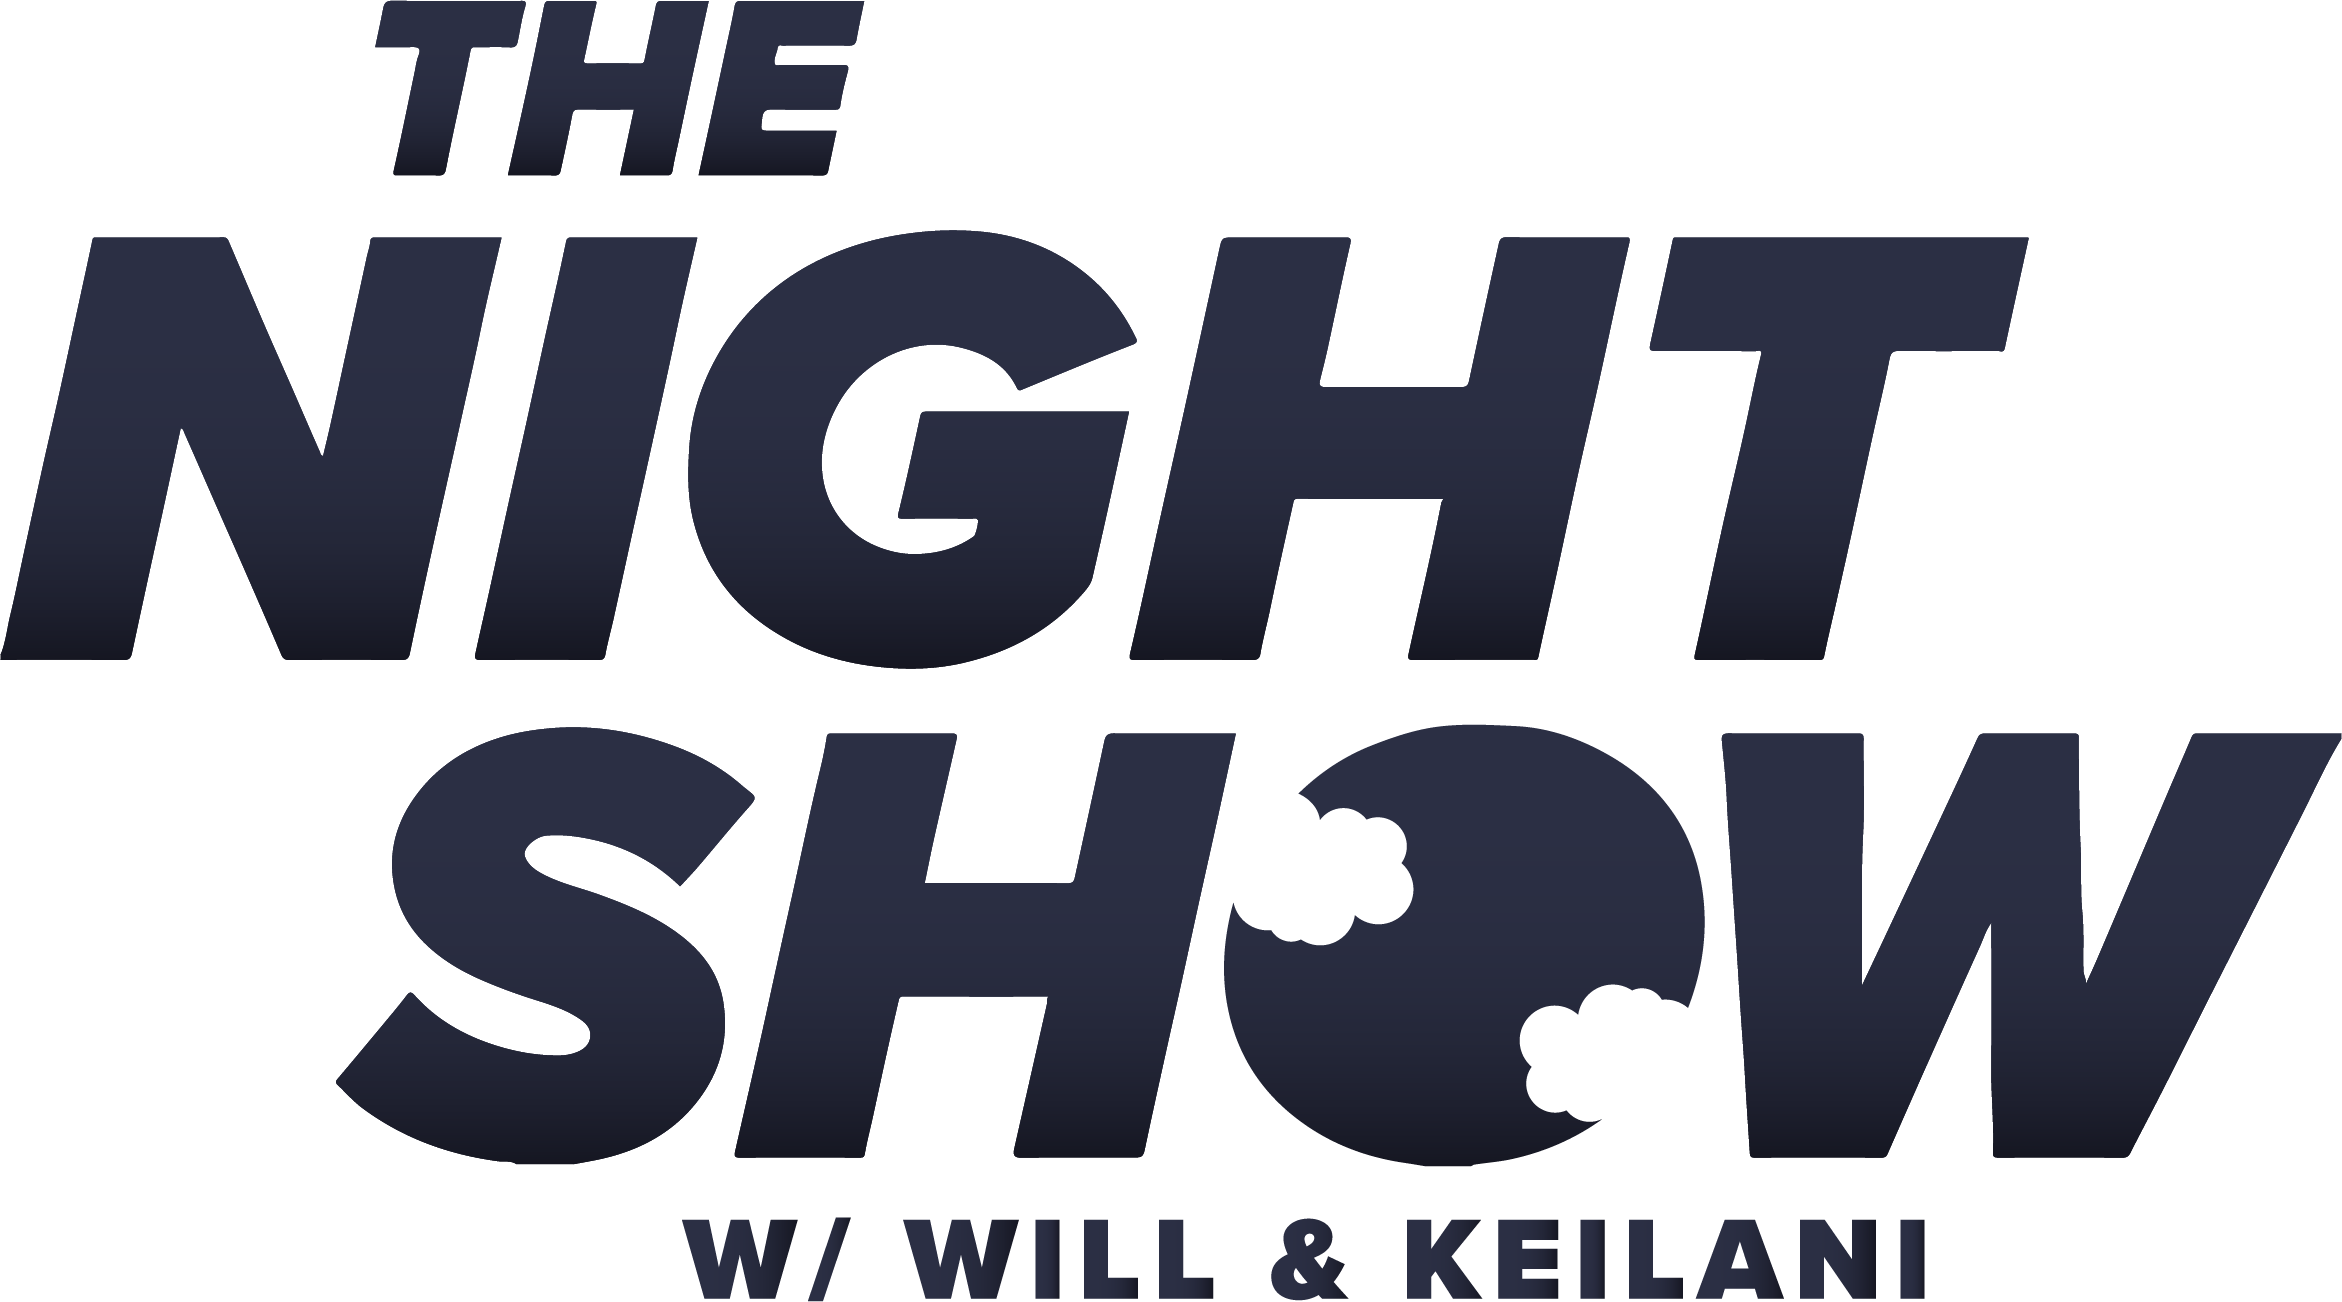 The Night Show